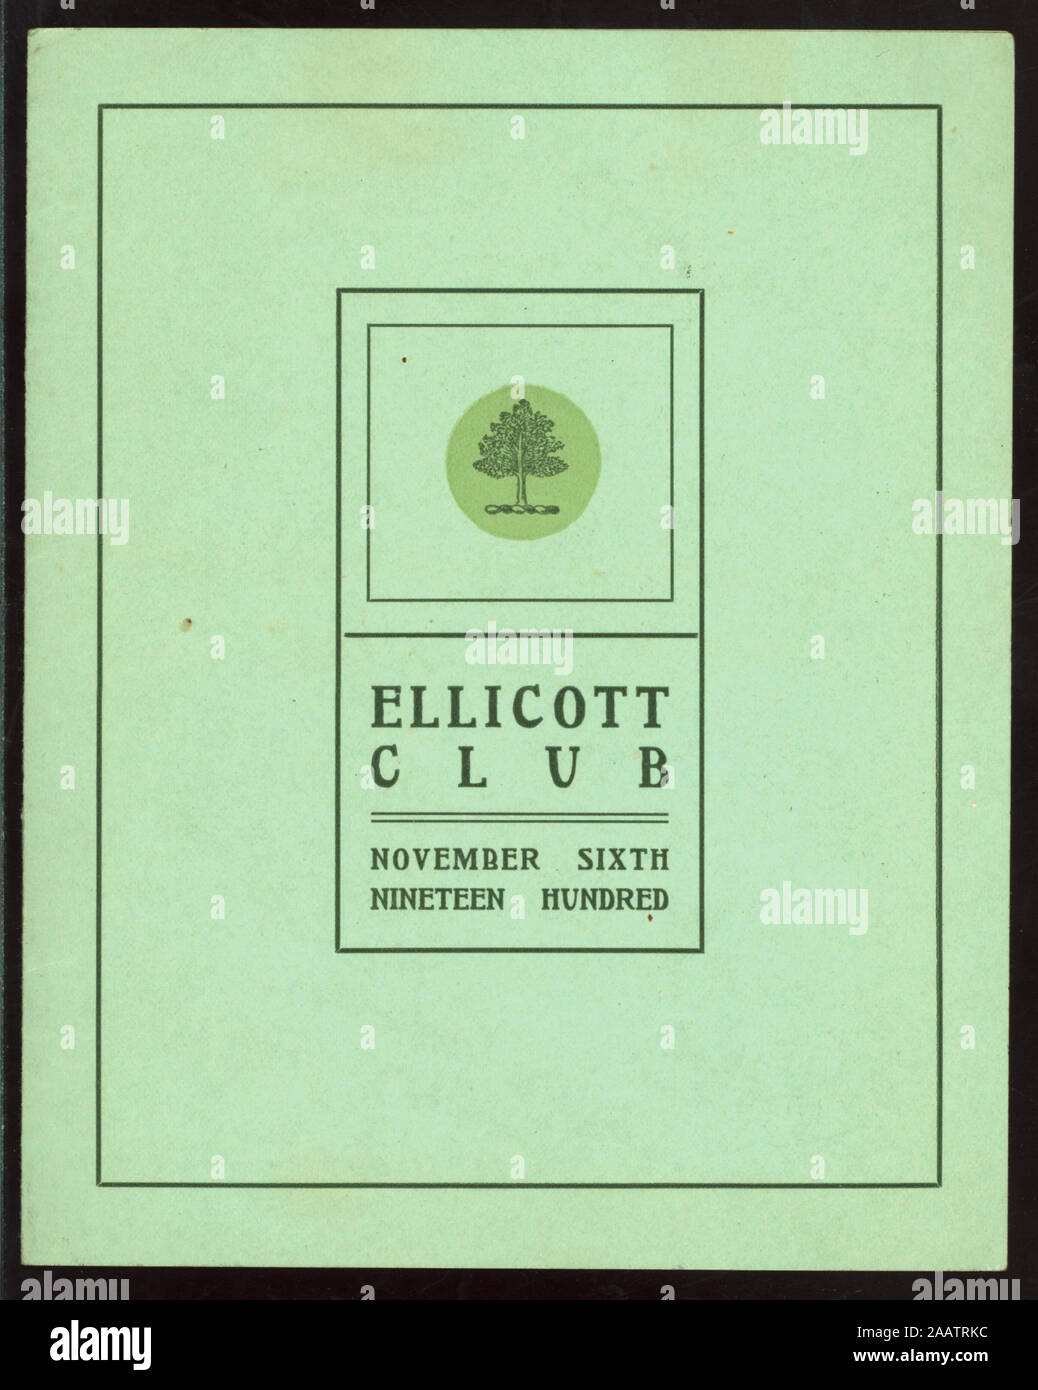 ELECTION NIGHT DINNER (held by) ELLICOTT CLUB (at) (OTHER (CLUB);) A LA CARTE MENU INCLUDES WINE LIST; MUSICAL PROGRAM; LAST PAGE OF MENU HAS ELECTION TALLY SHEET FOR PRESIDENTIAL ELECTION  RETURNS (MCKINLEY & BRYAN); SMALL SKETCH OF TREE ON COVER; ELECTION NIGHT DINNER [held by] ELLICOTT CLUB [at]  (OTHER (CLUB);) Stock Photo